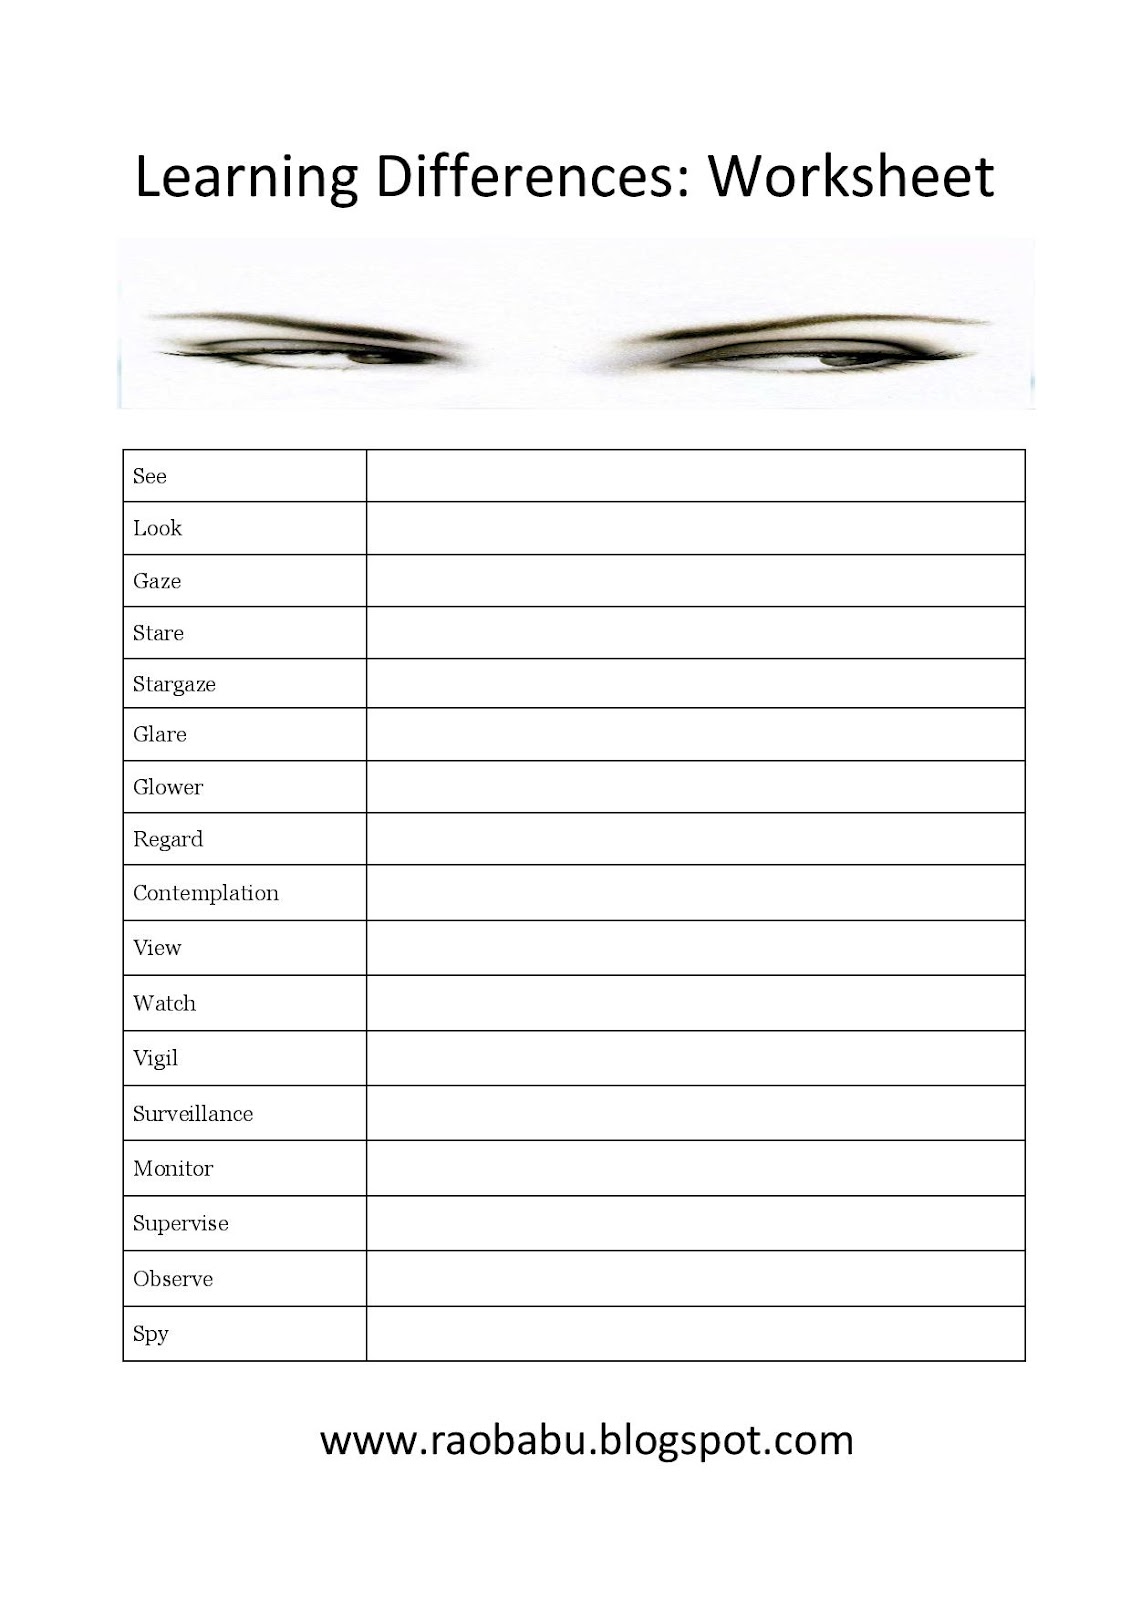 Learn English: Learning Differences : Worksheet